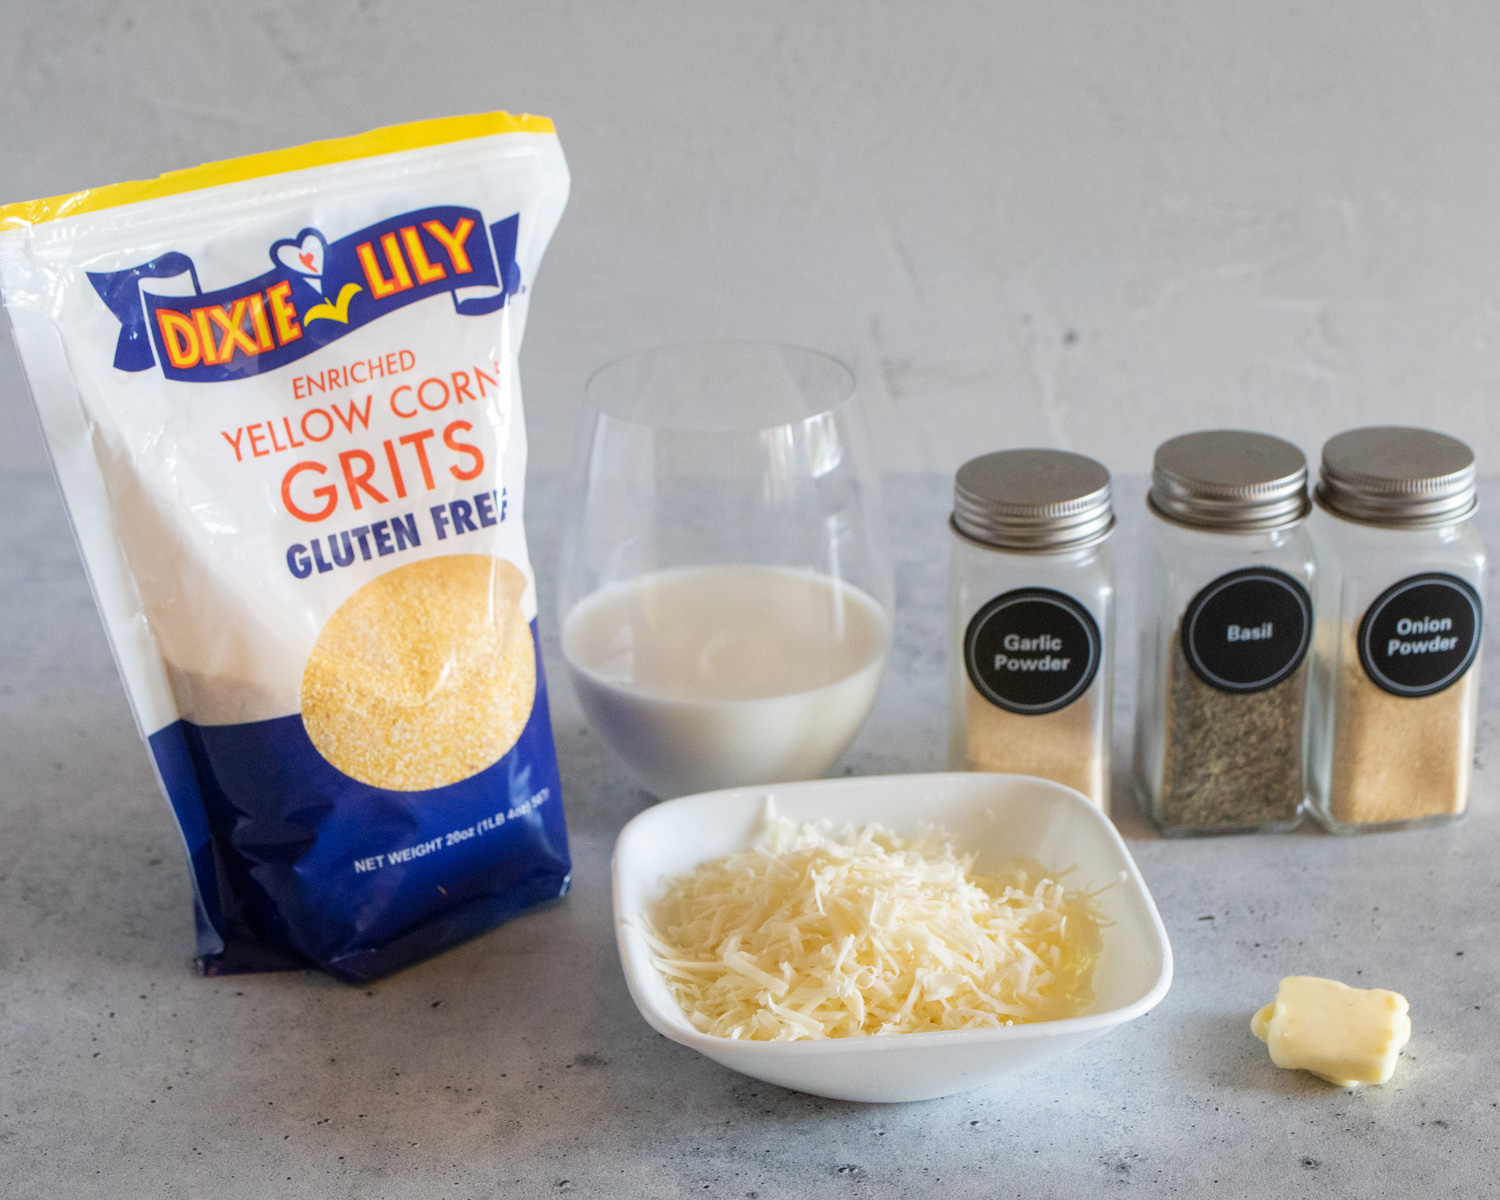 Asiago cheese grits ingredients - grits, milk, cheese, butter, and spices